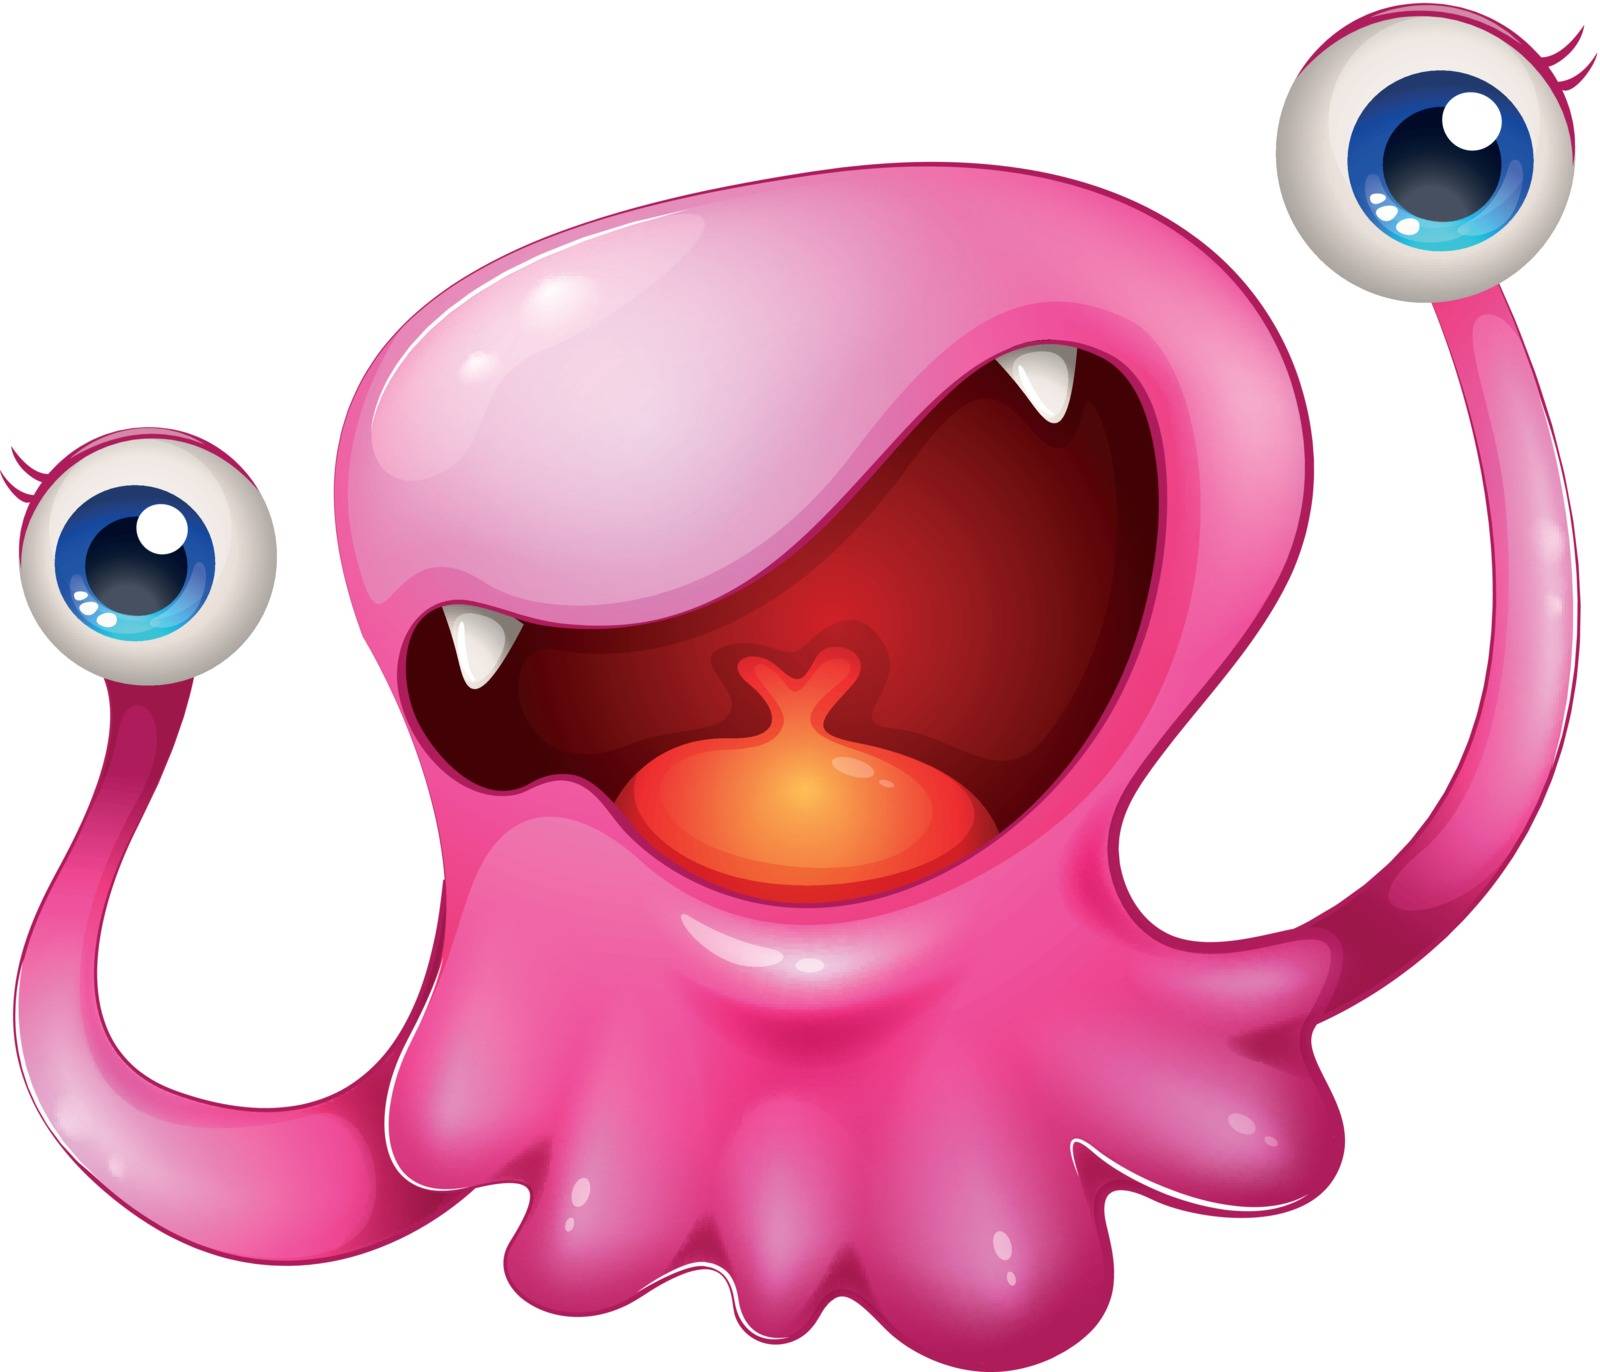 Illustration of a very excited pink monster on a white background